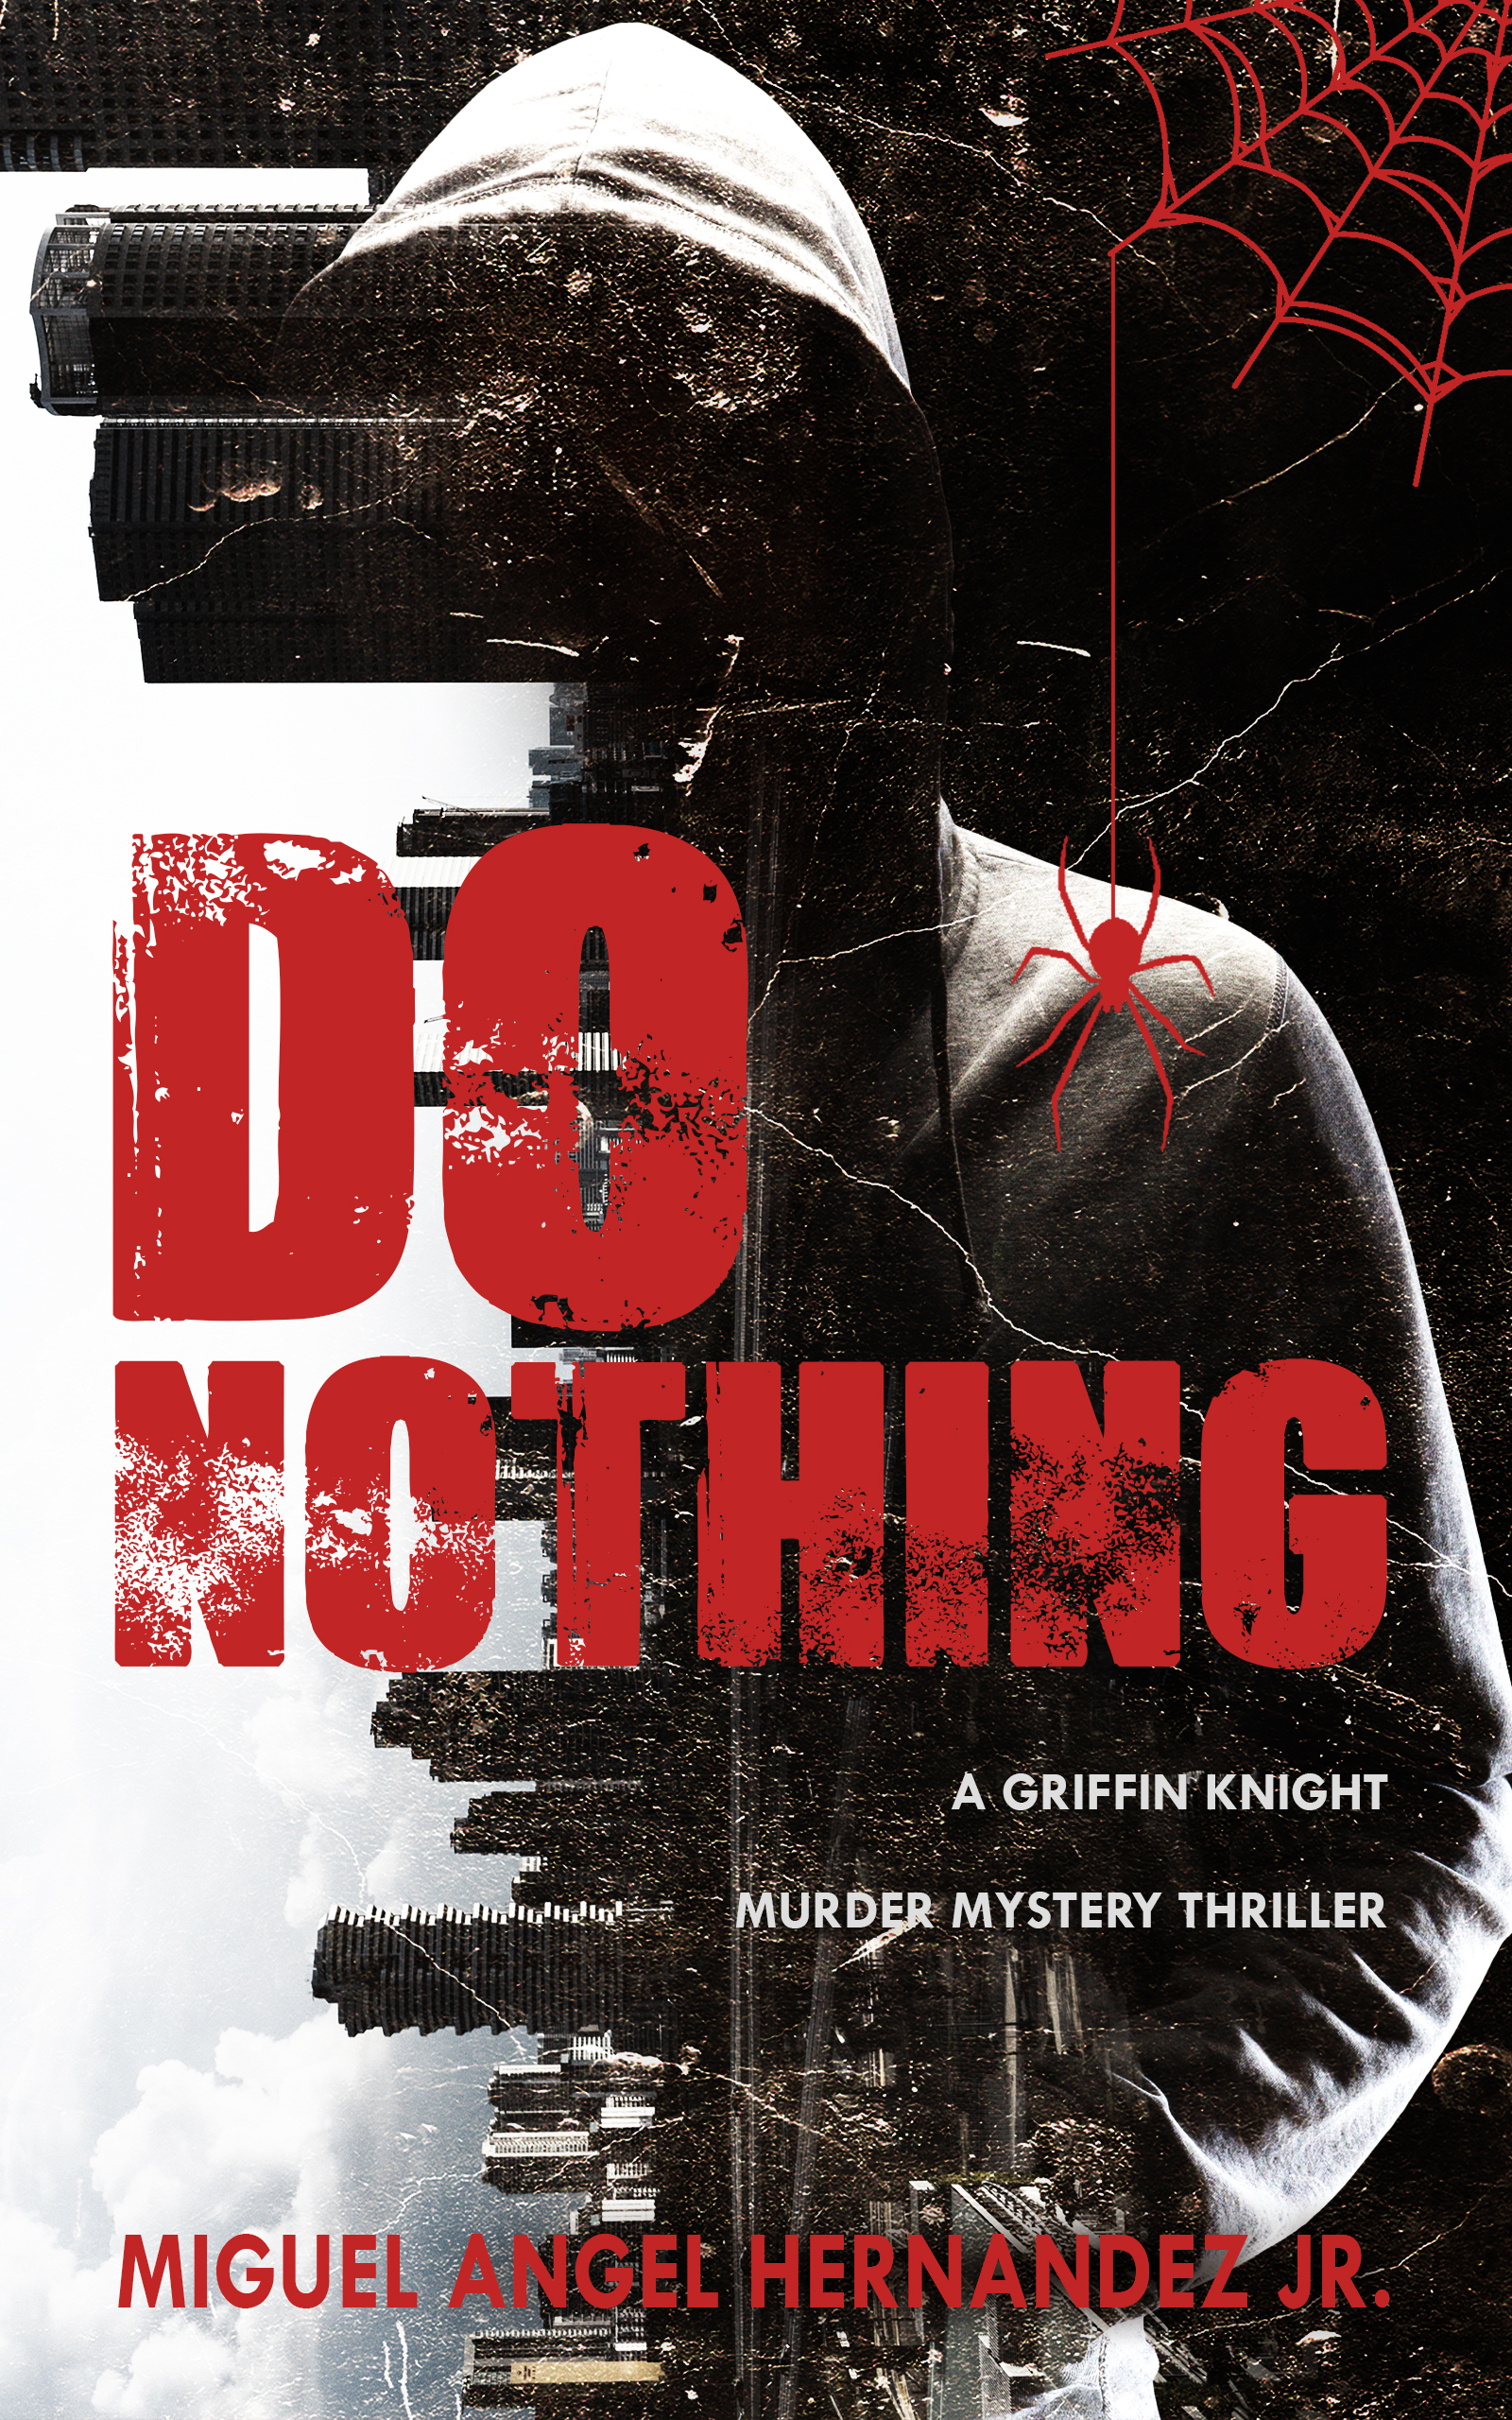 Do Nothing: A Griffin Murder Mystery Thriller by Miguel Angel Hernandez Jr.